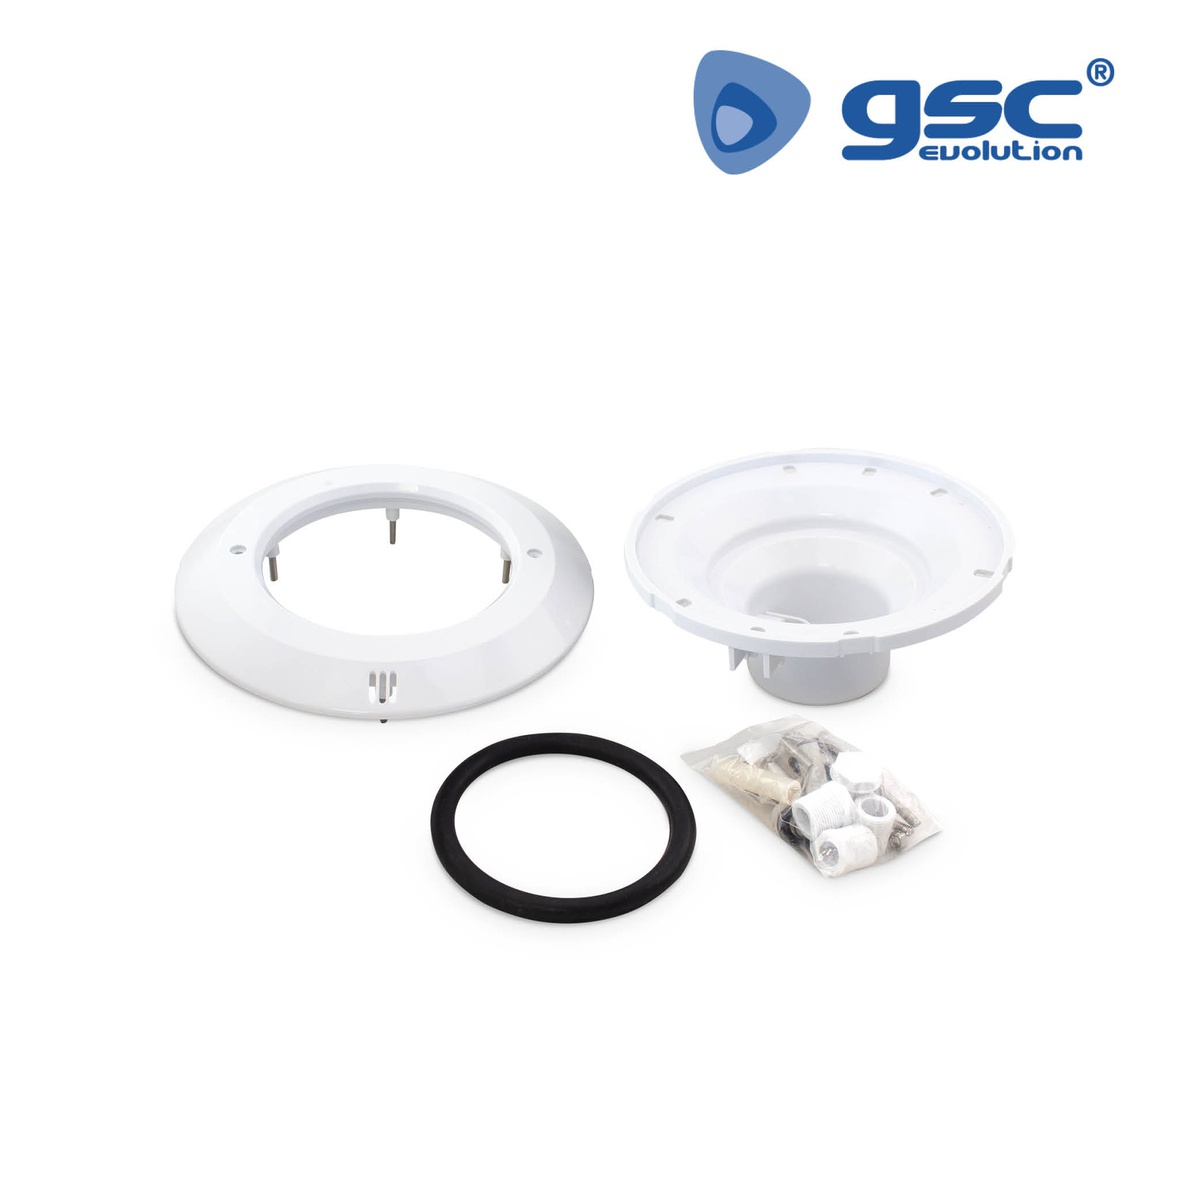 Spare set of support, &quot;O&quot; ring, frame, screws/accesories for waterlight refs. 201400001